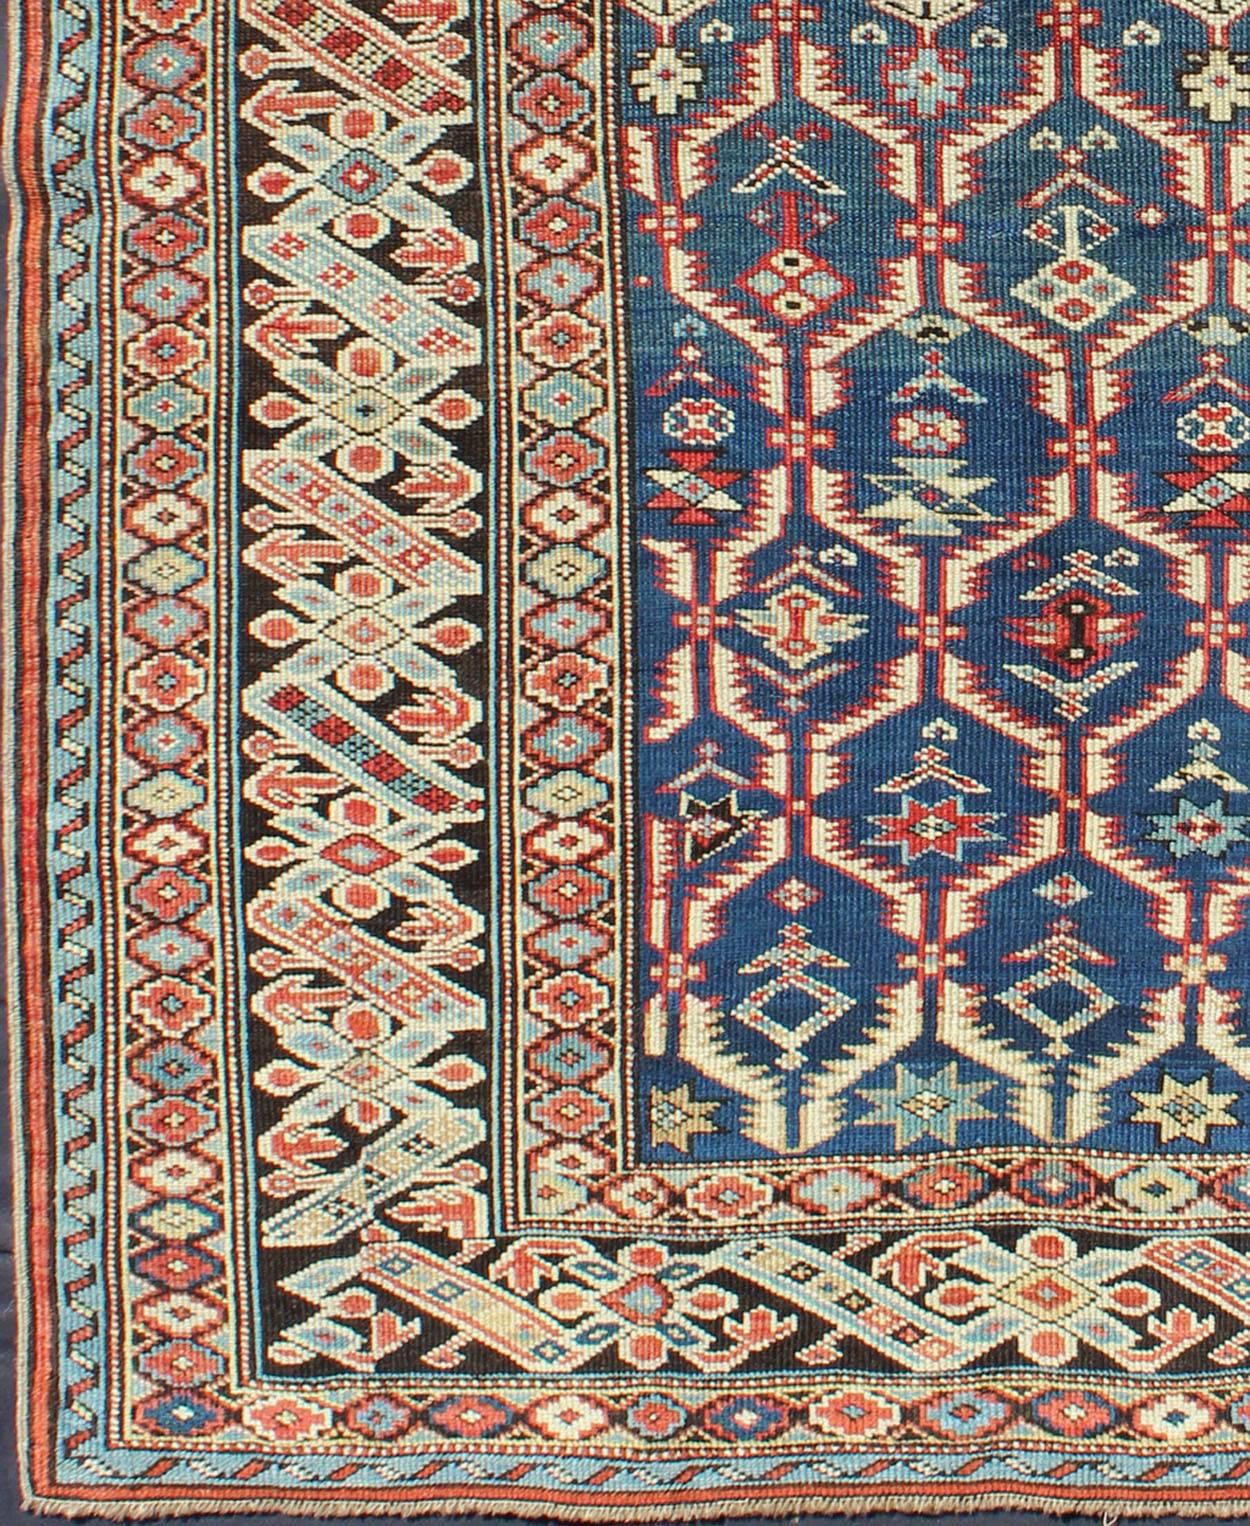 Measures: 3'6 x 4'10.
This Gorgeous 19th Century Chi Chi rug displays an amazing color combination of medium blue, Green, Brown and rust colors, featuring a repeating symmetrical patterning, enclosed by wonderful complementary borders.

 Antique